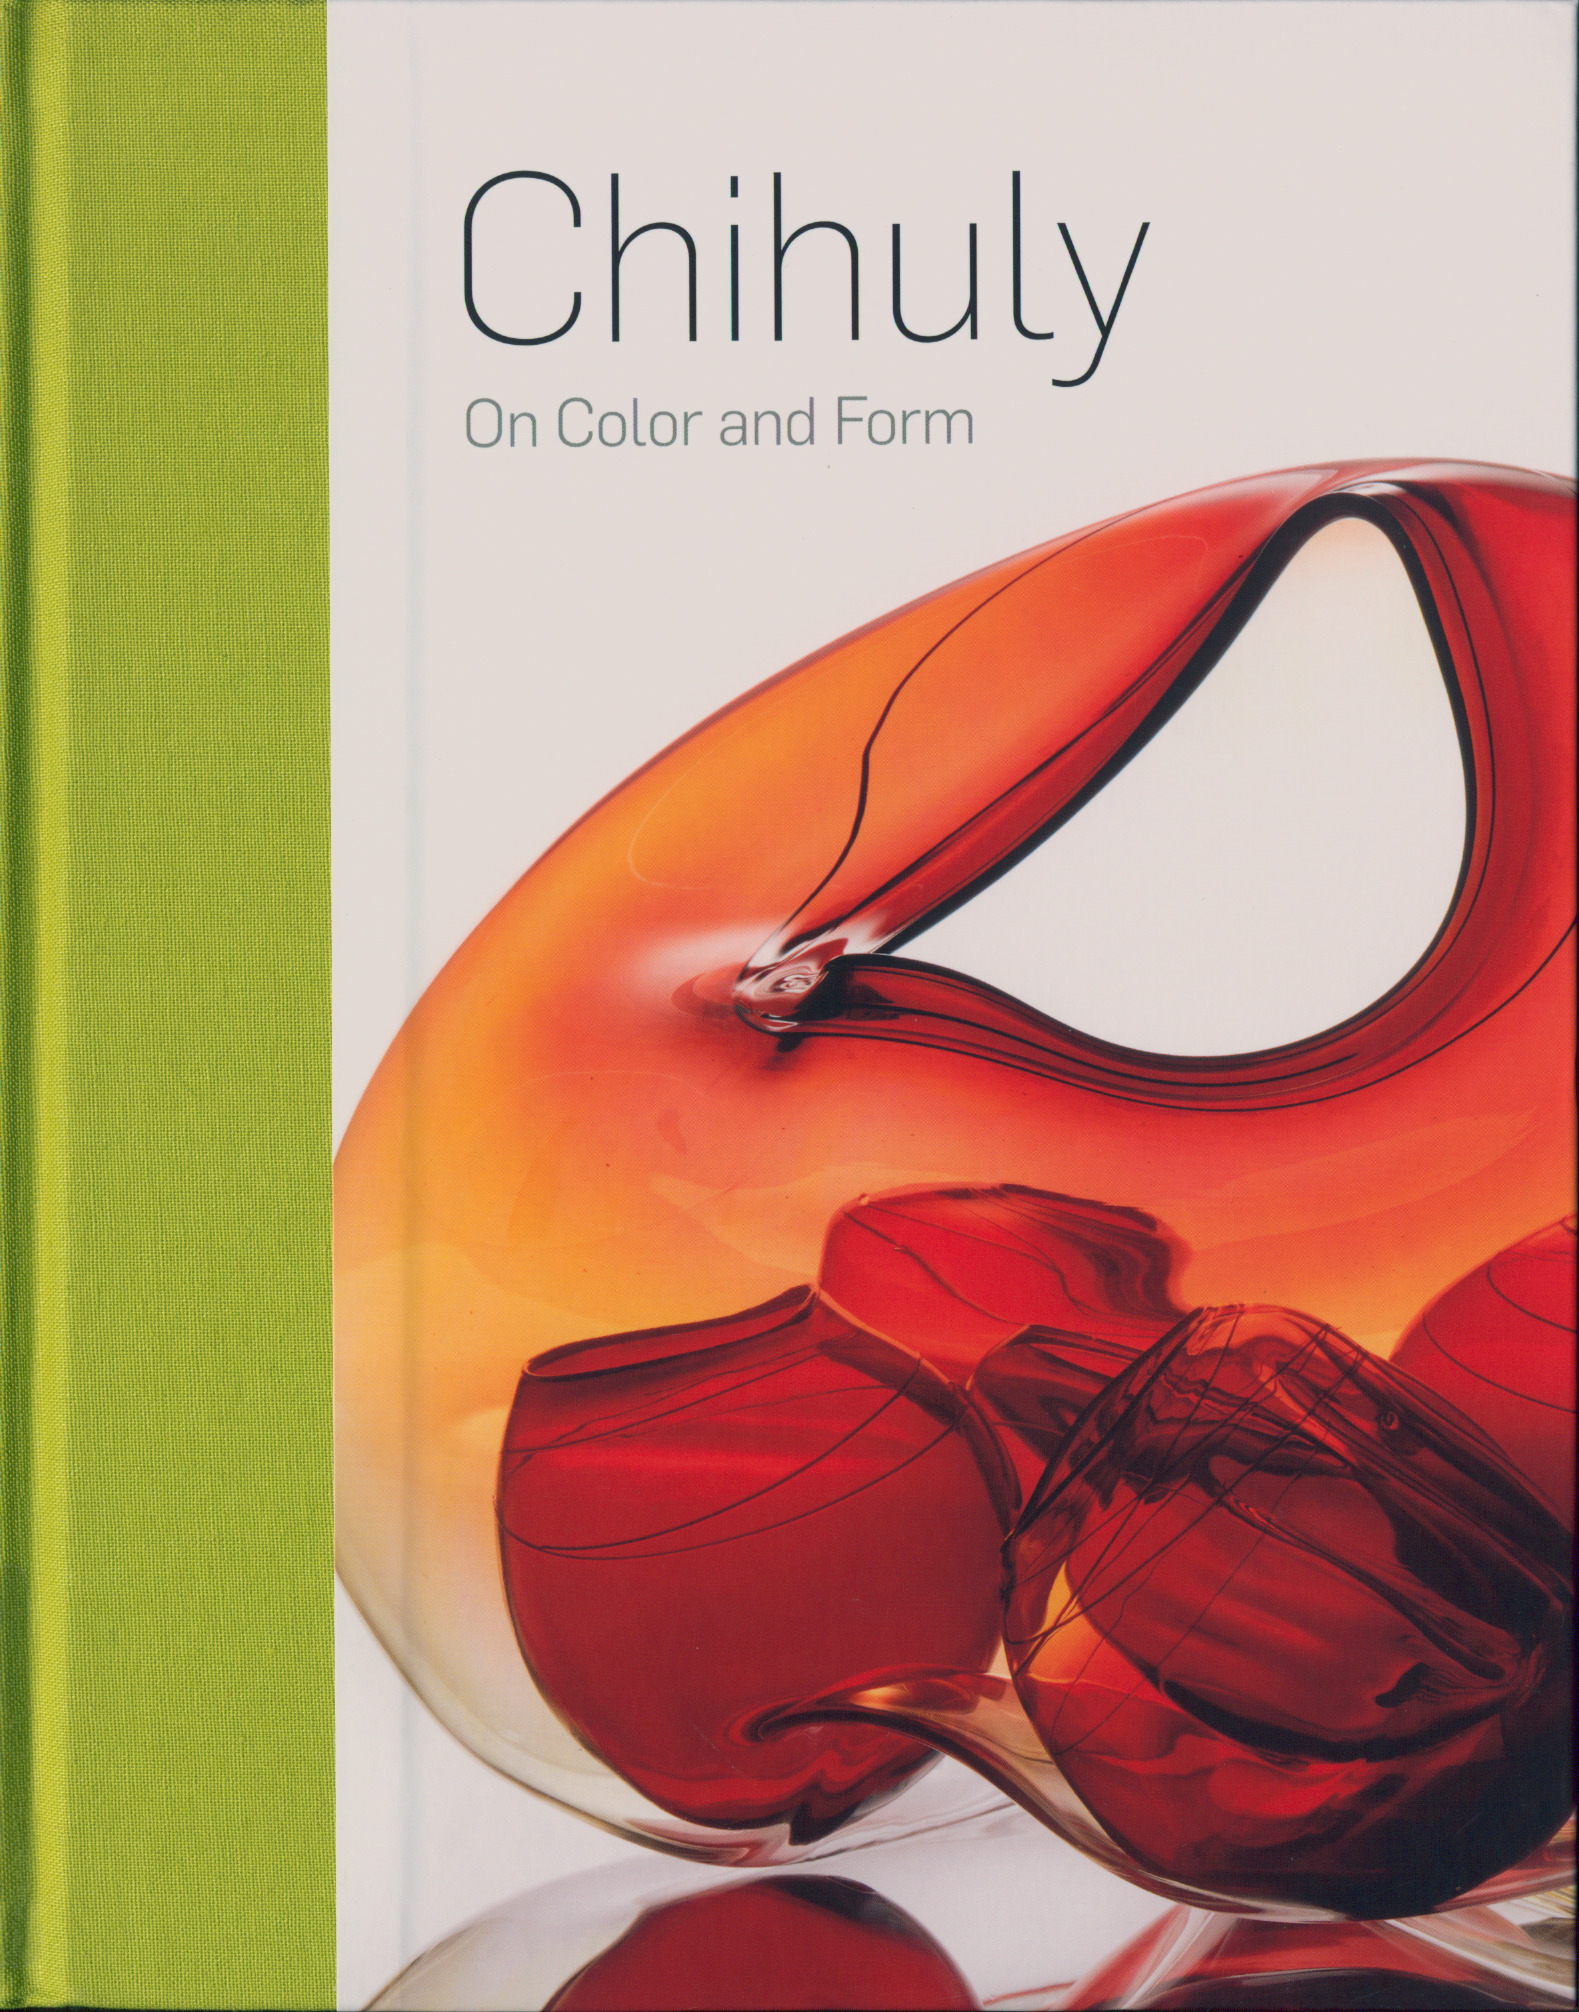 Chihuly: On Color and Form book cover